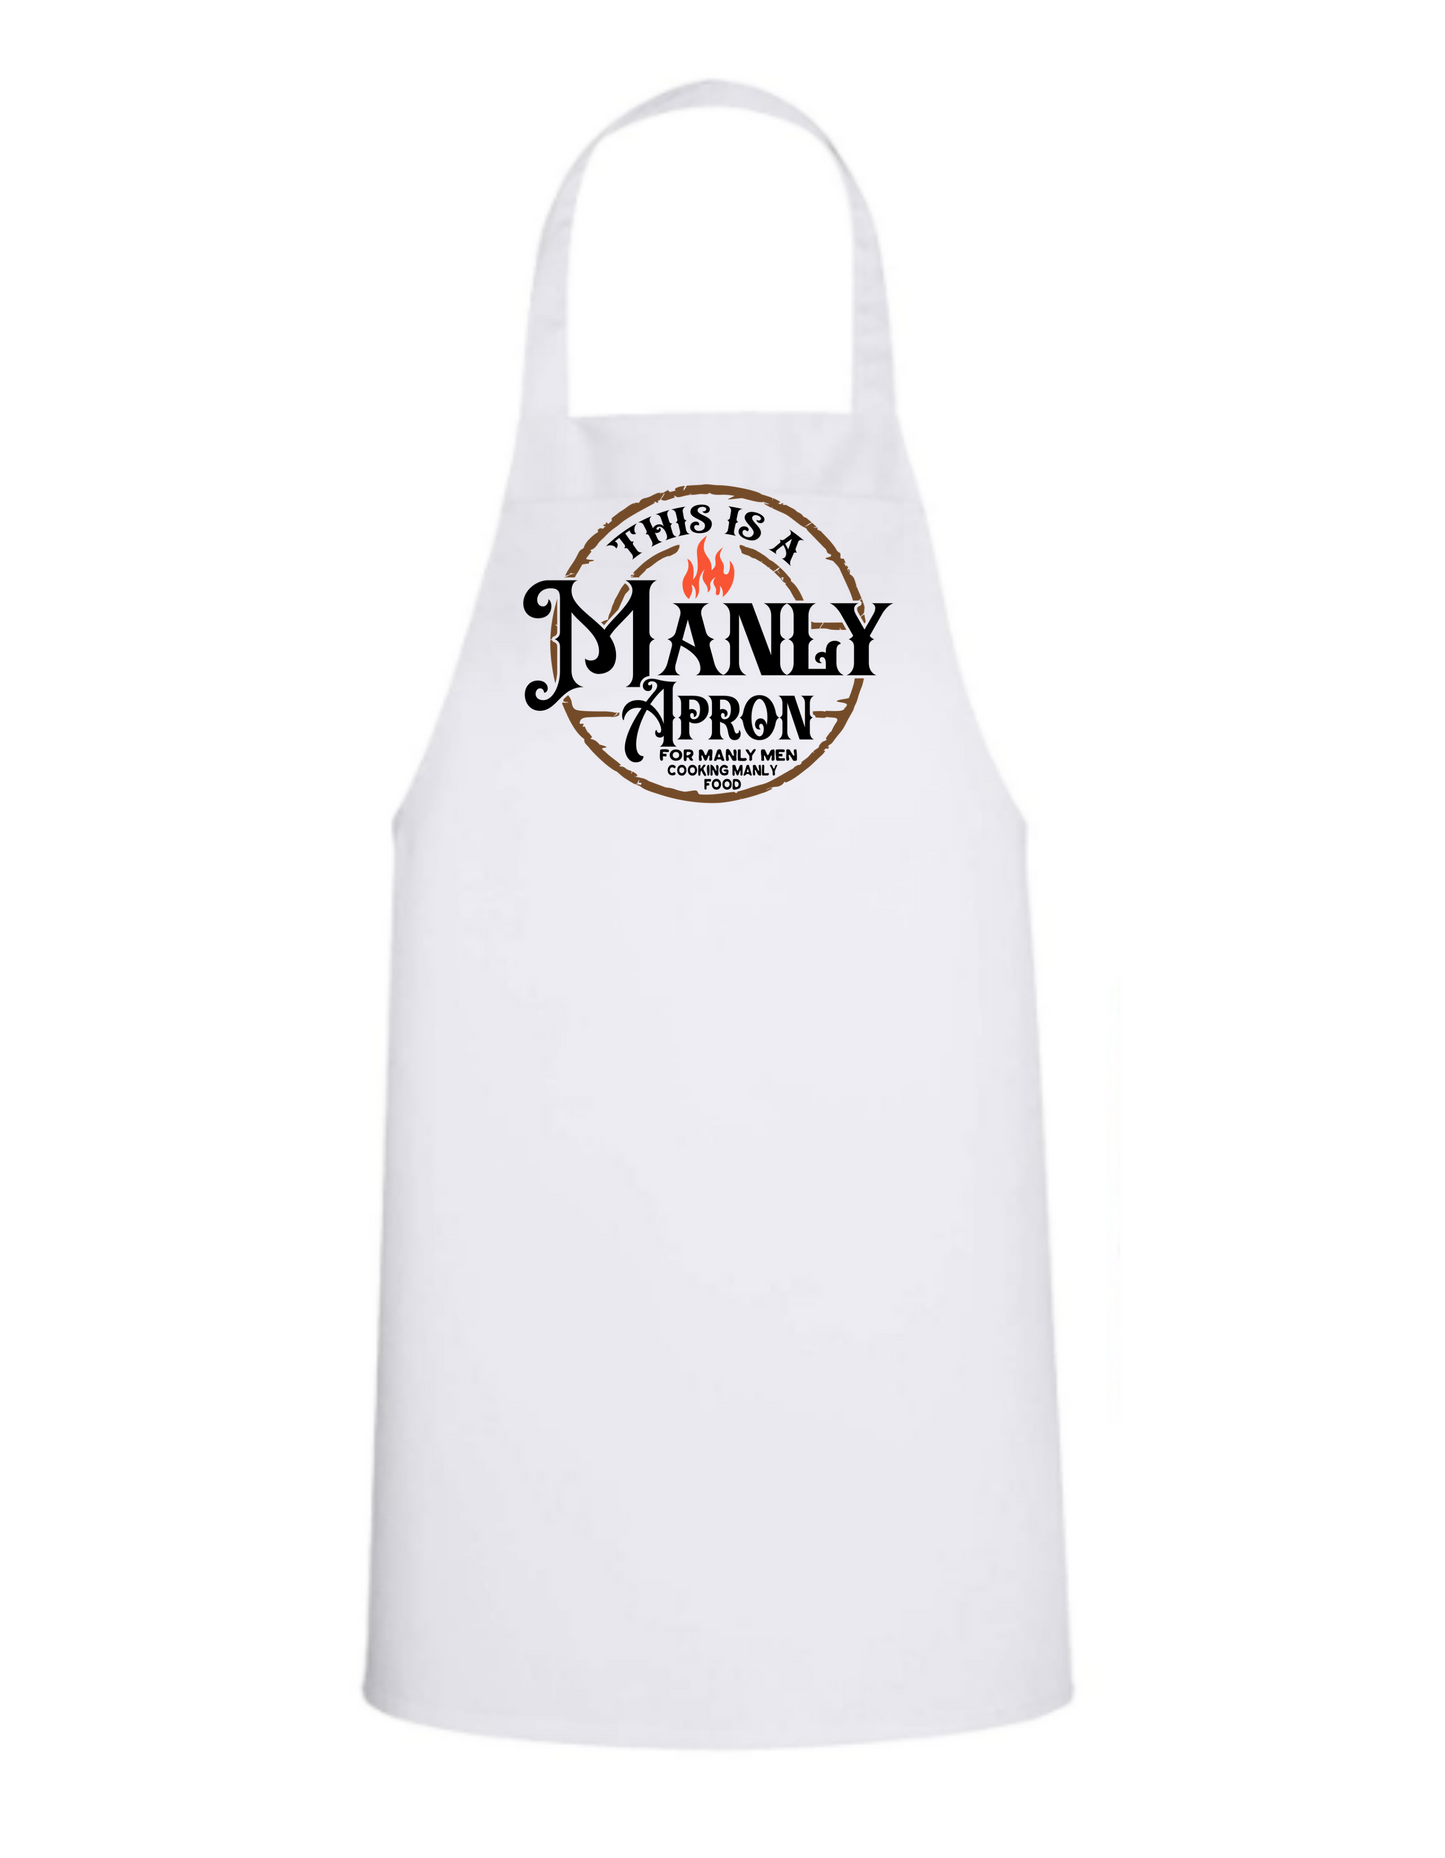 Manly Apron- White Apron with Color design Great Gift - Mister Snarky's